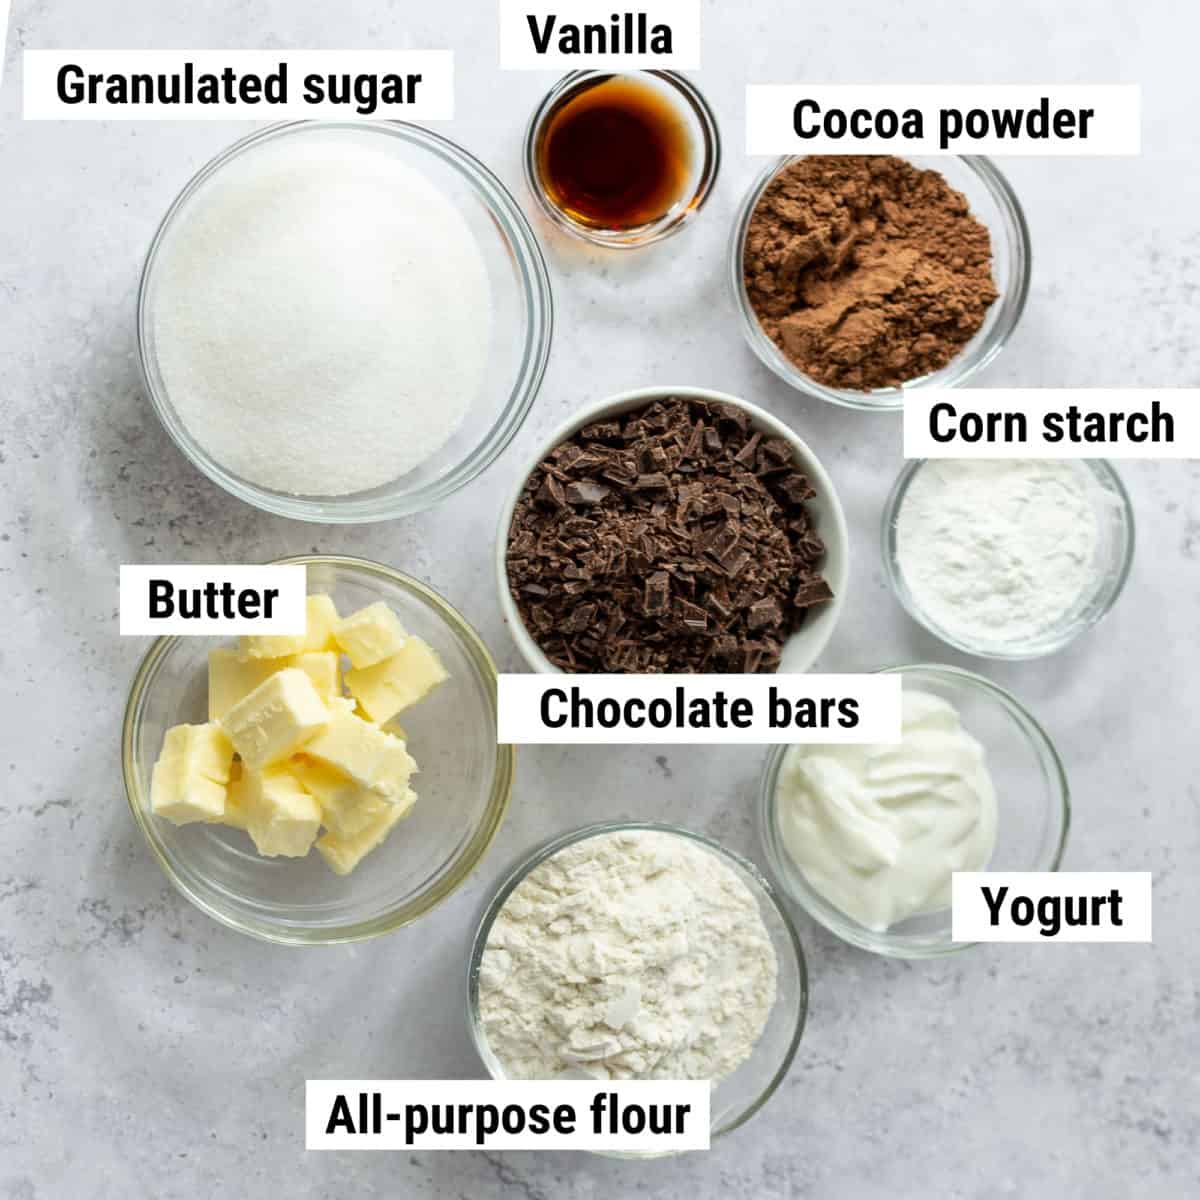 The ingredients used to make eggless brownies spread out on a table.